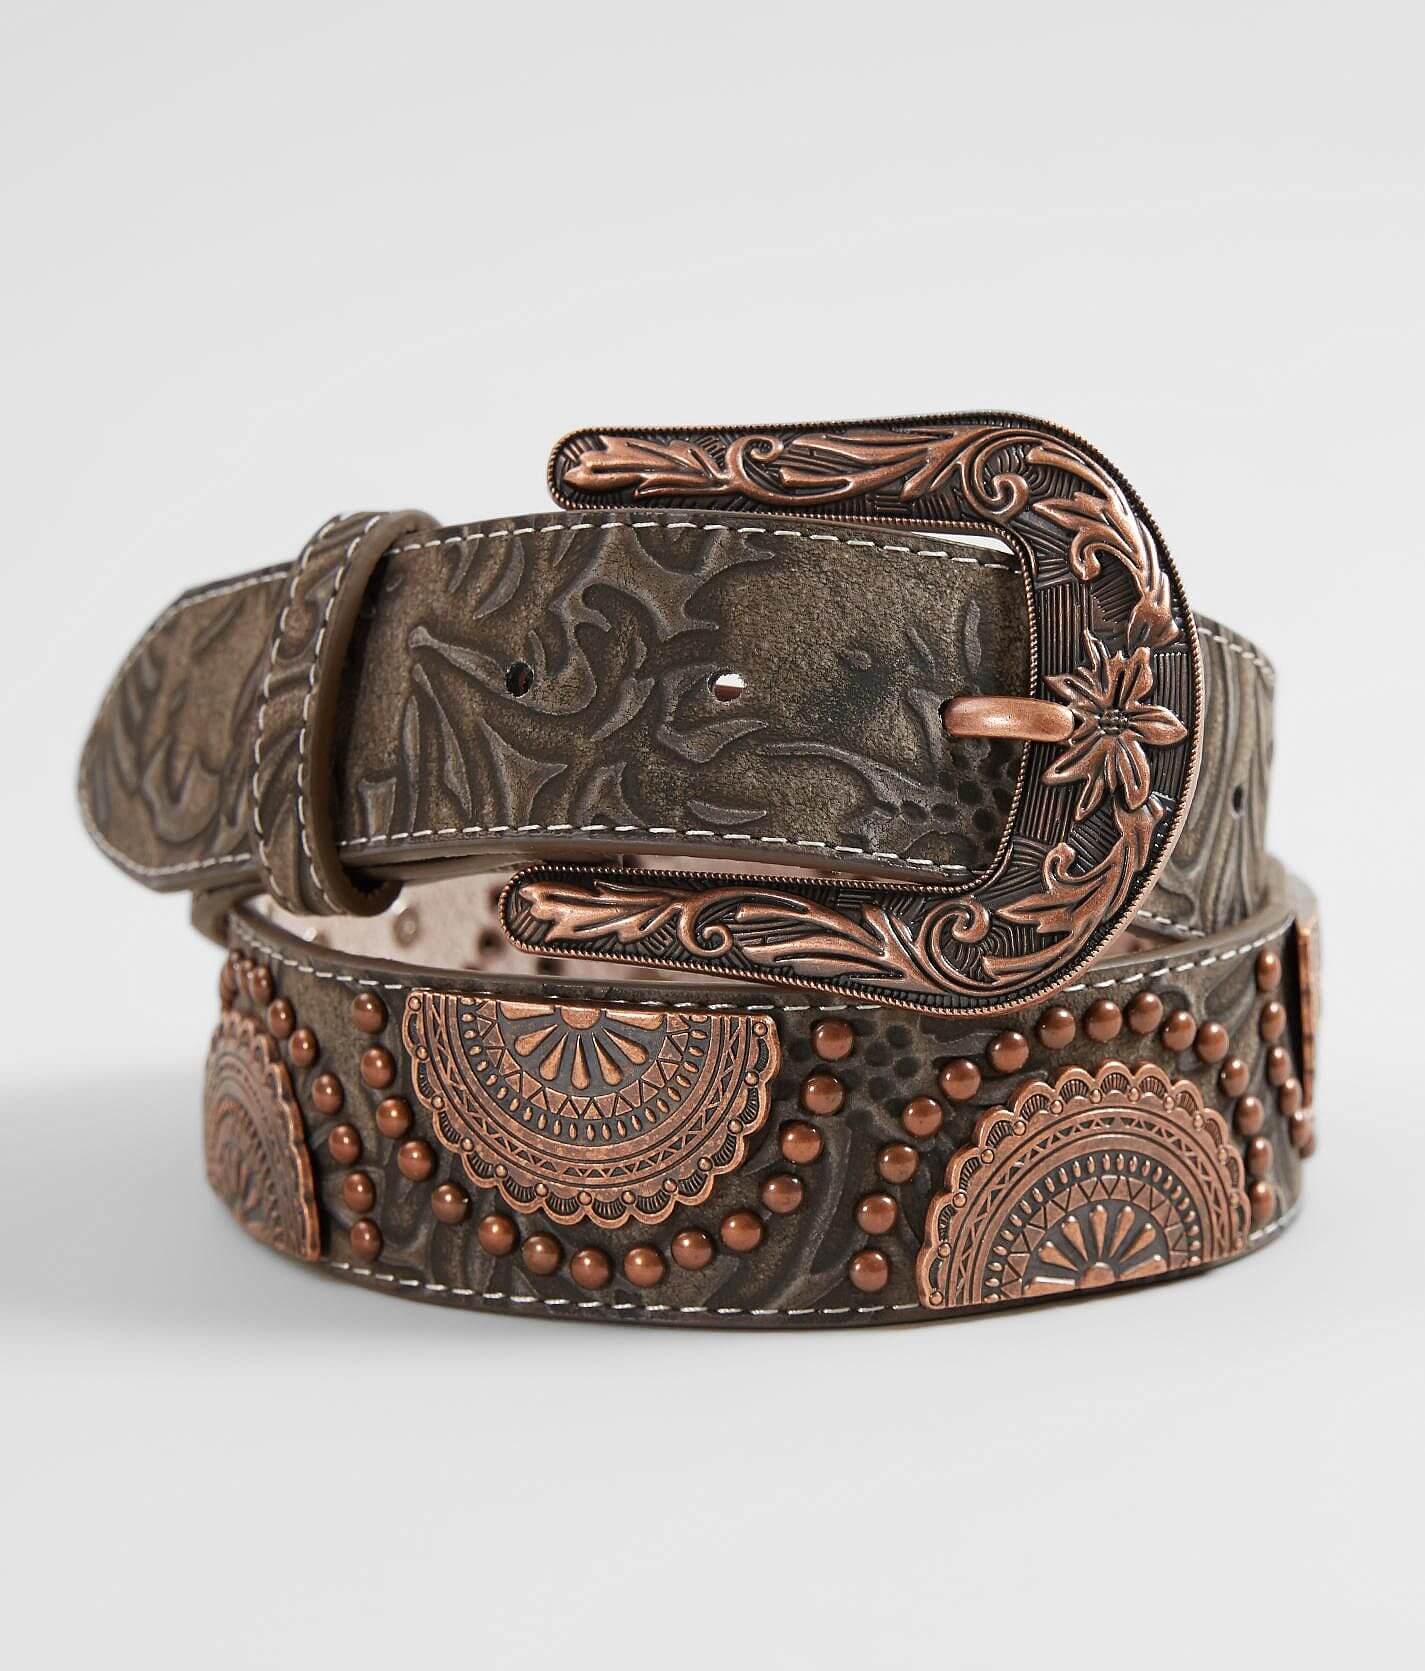 TOPACC Western Genuine Leather Pattern Tooled Belt - Buckle with